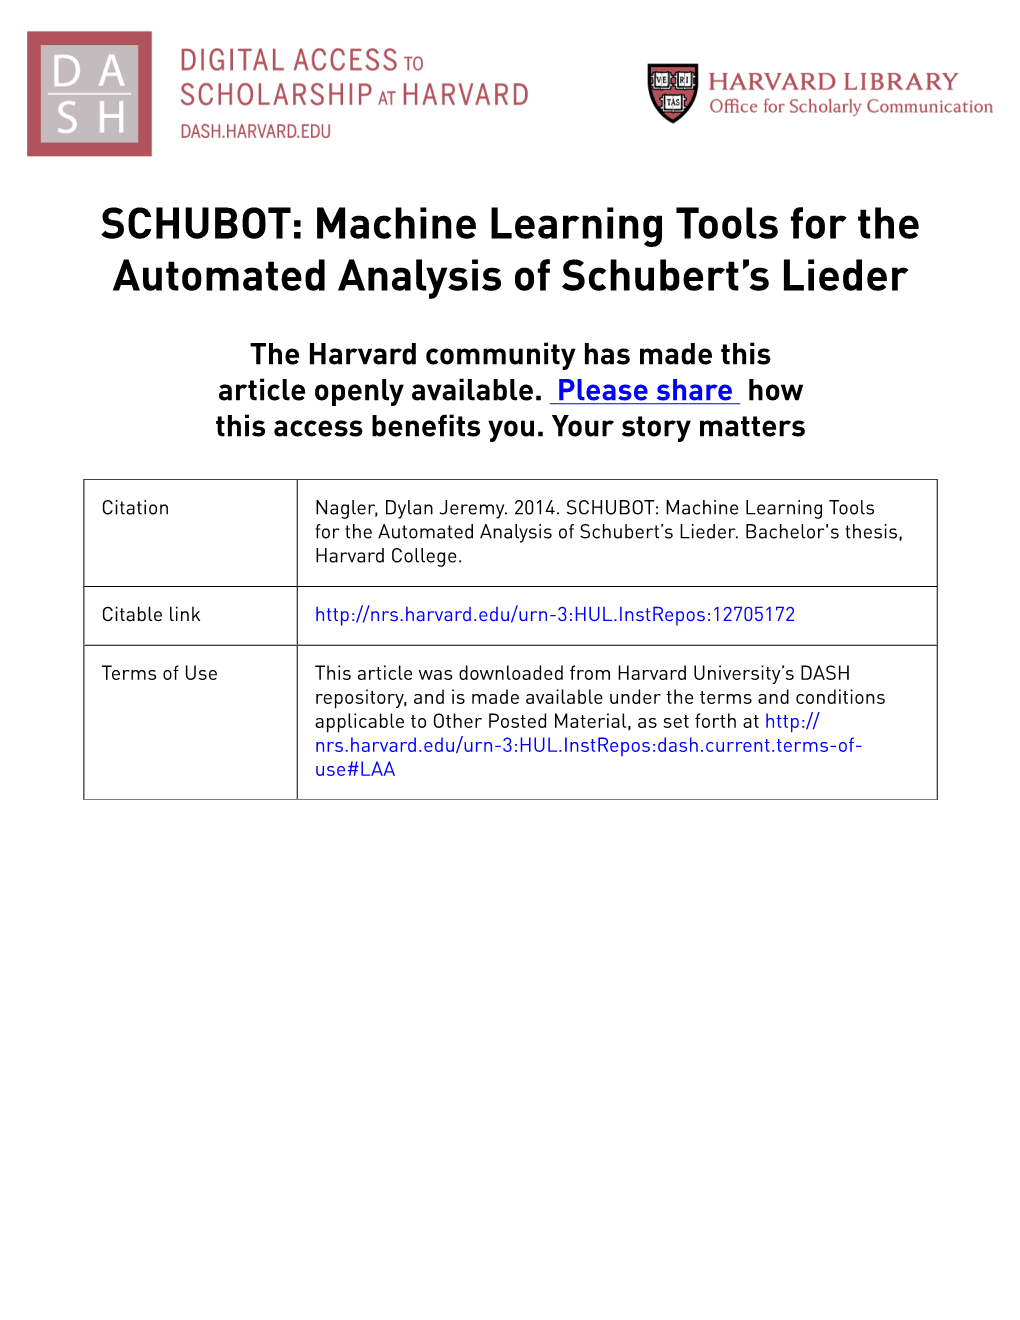 Machine Learning Tools for the Automated Analysis of Schubert's